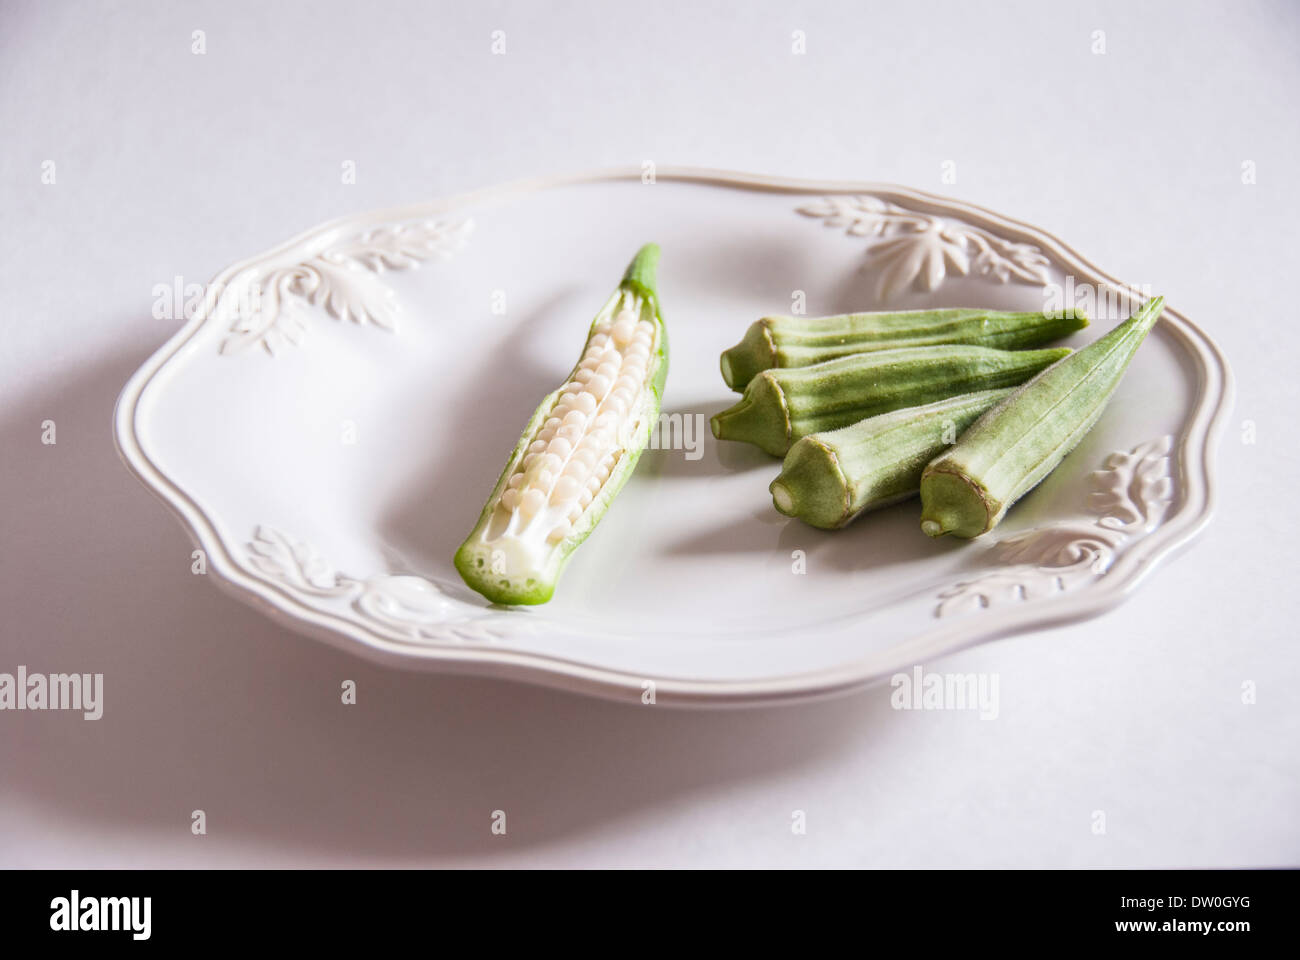 Fresh uncooked okra pods on a white dish, with one cut open showing seeds. Stock Photo